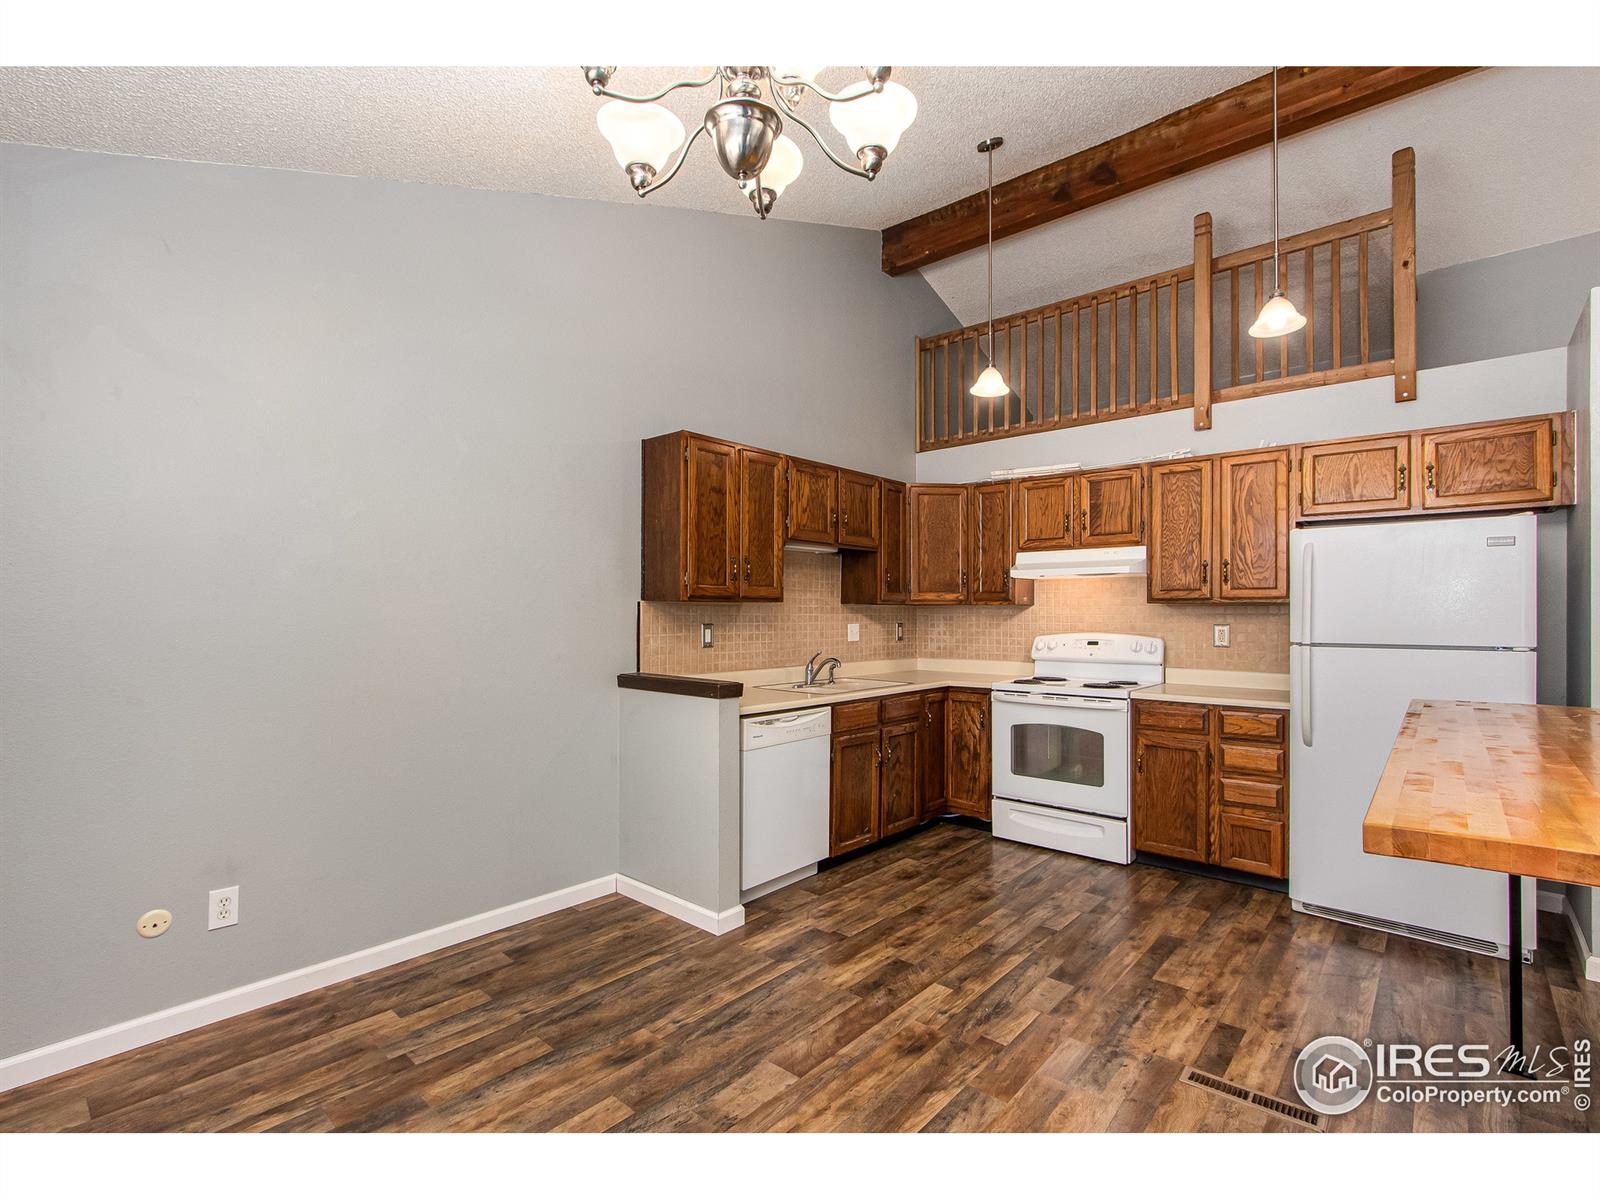 3405 16th, Greeley, CO